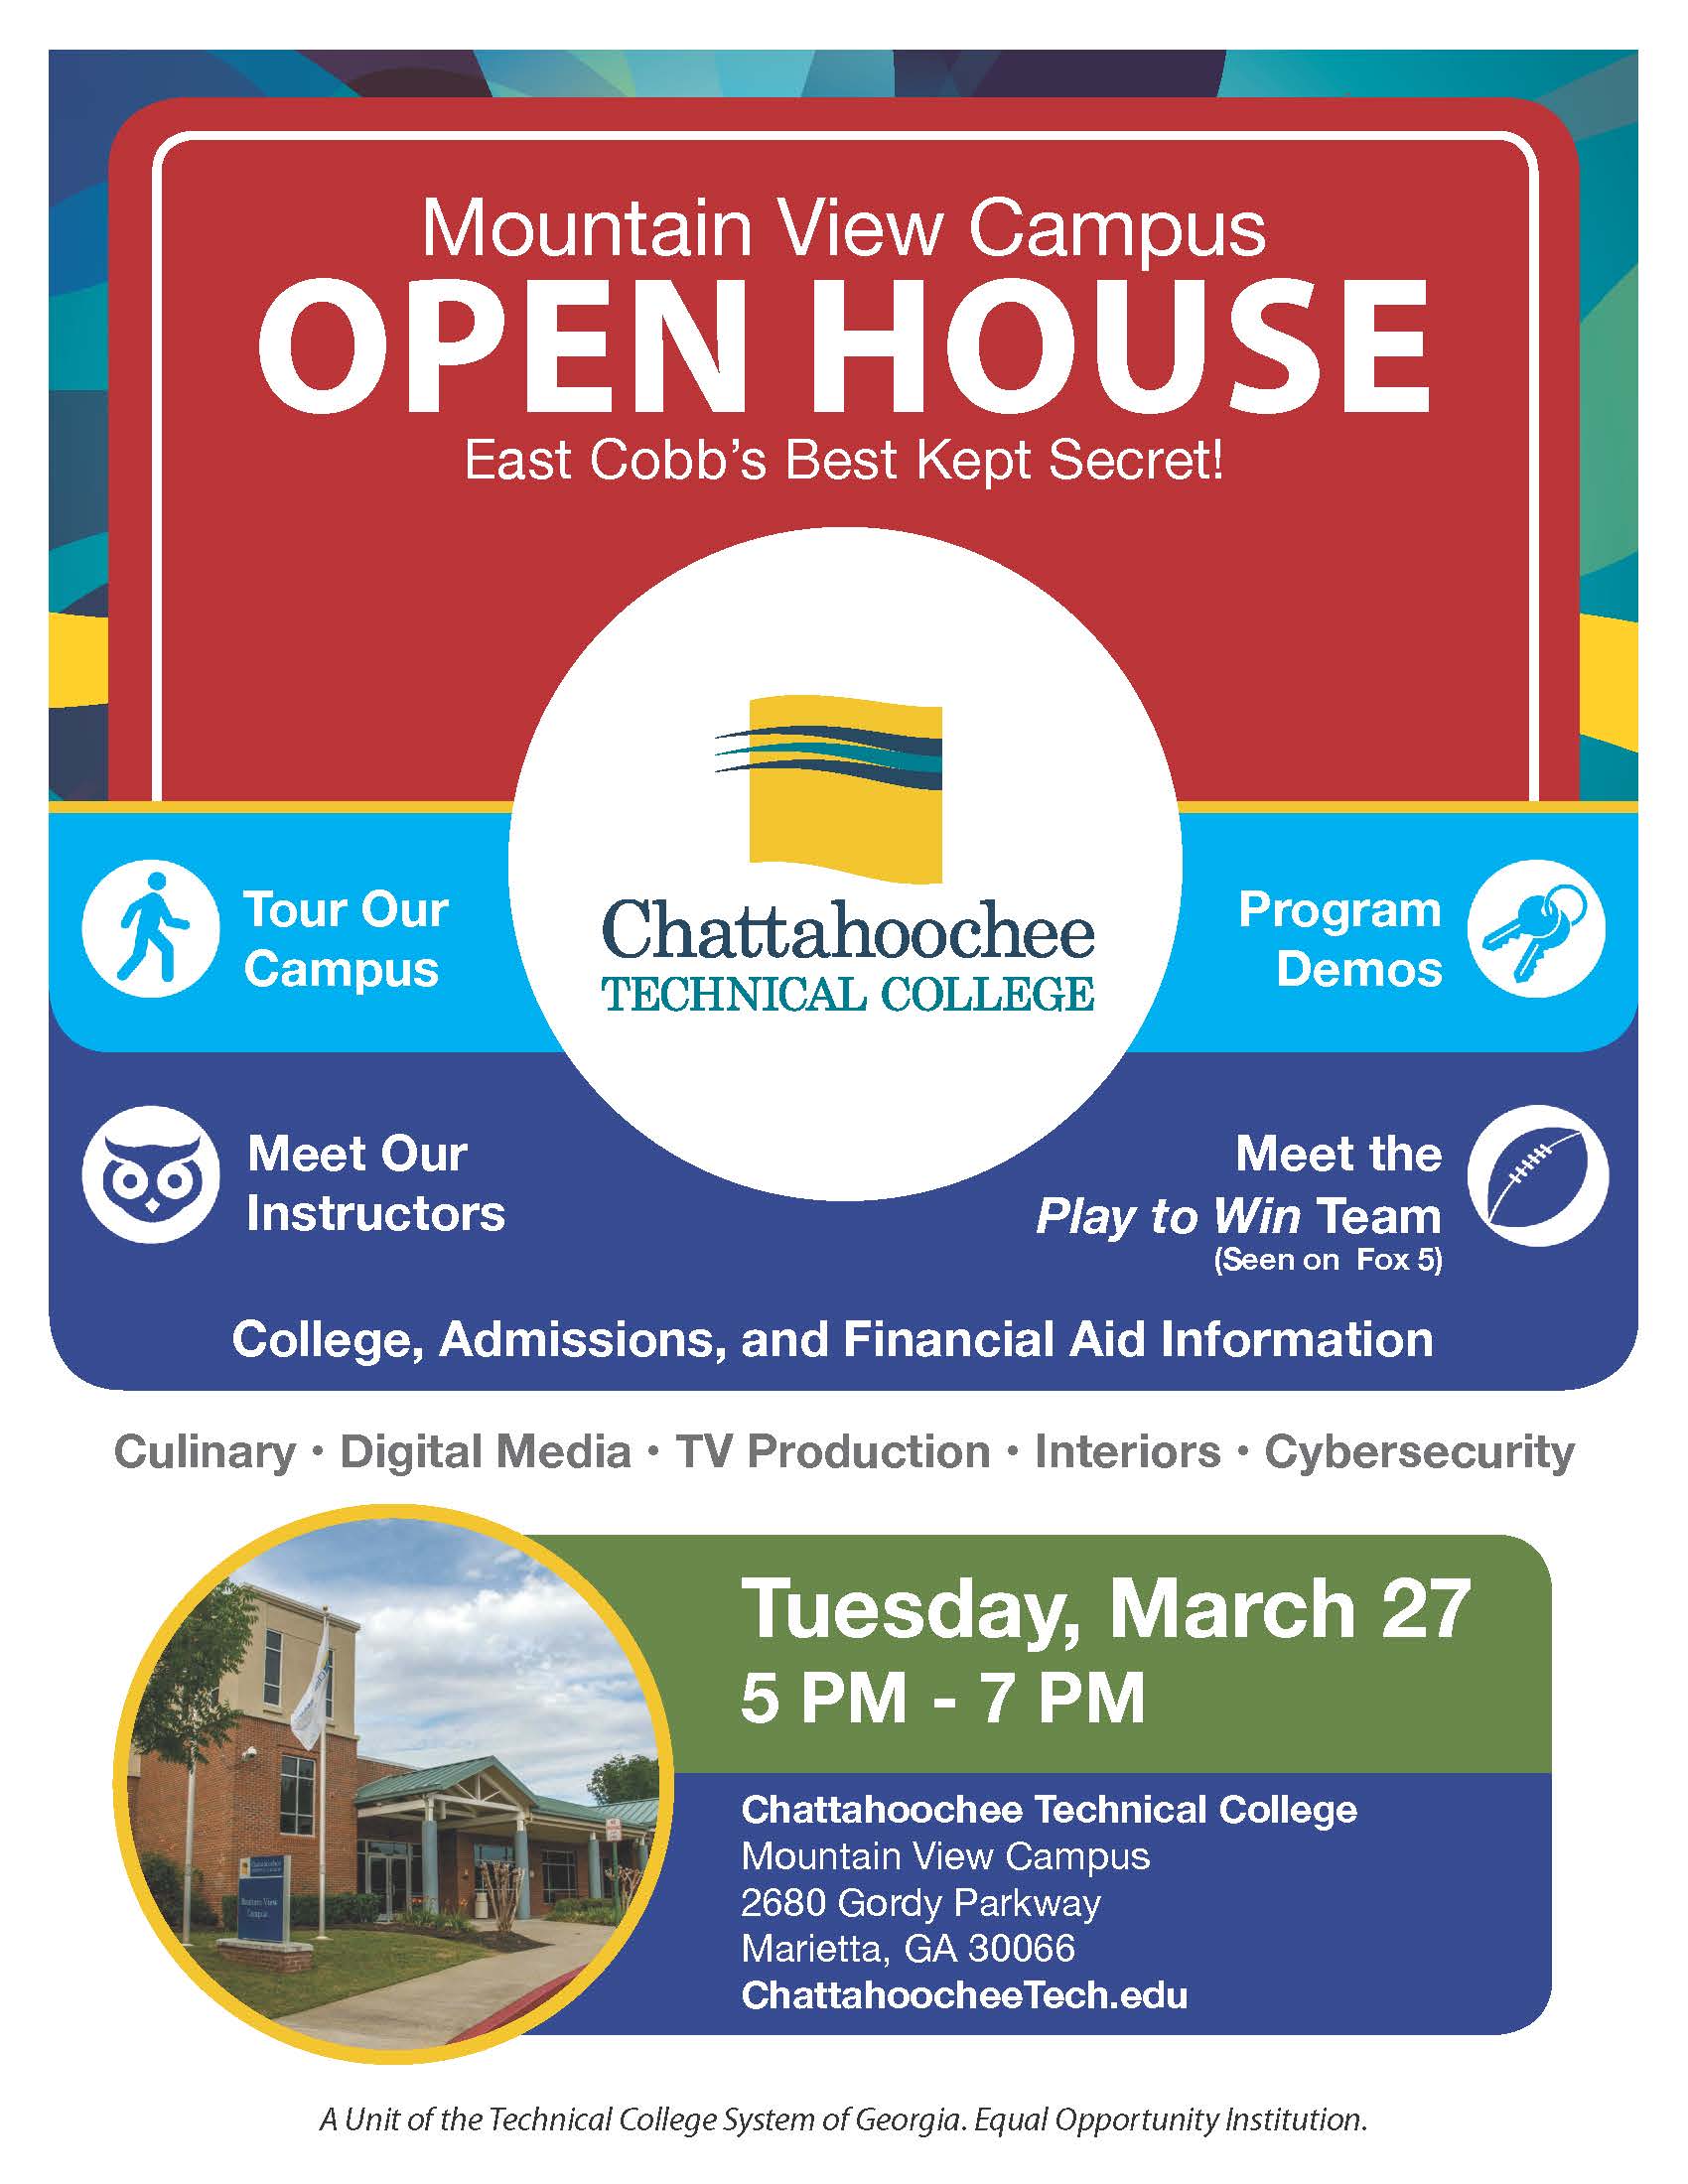 Chattahoochee Tech to Host Open House at Mountain View Campus in East Cobb County